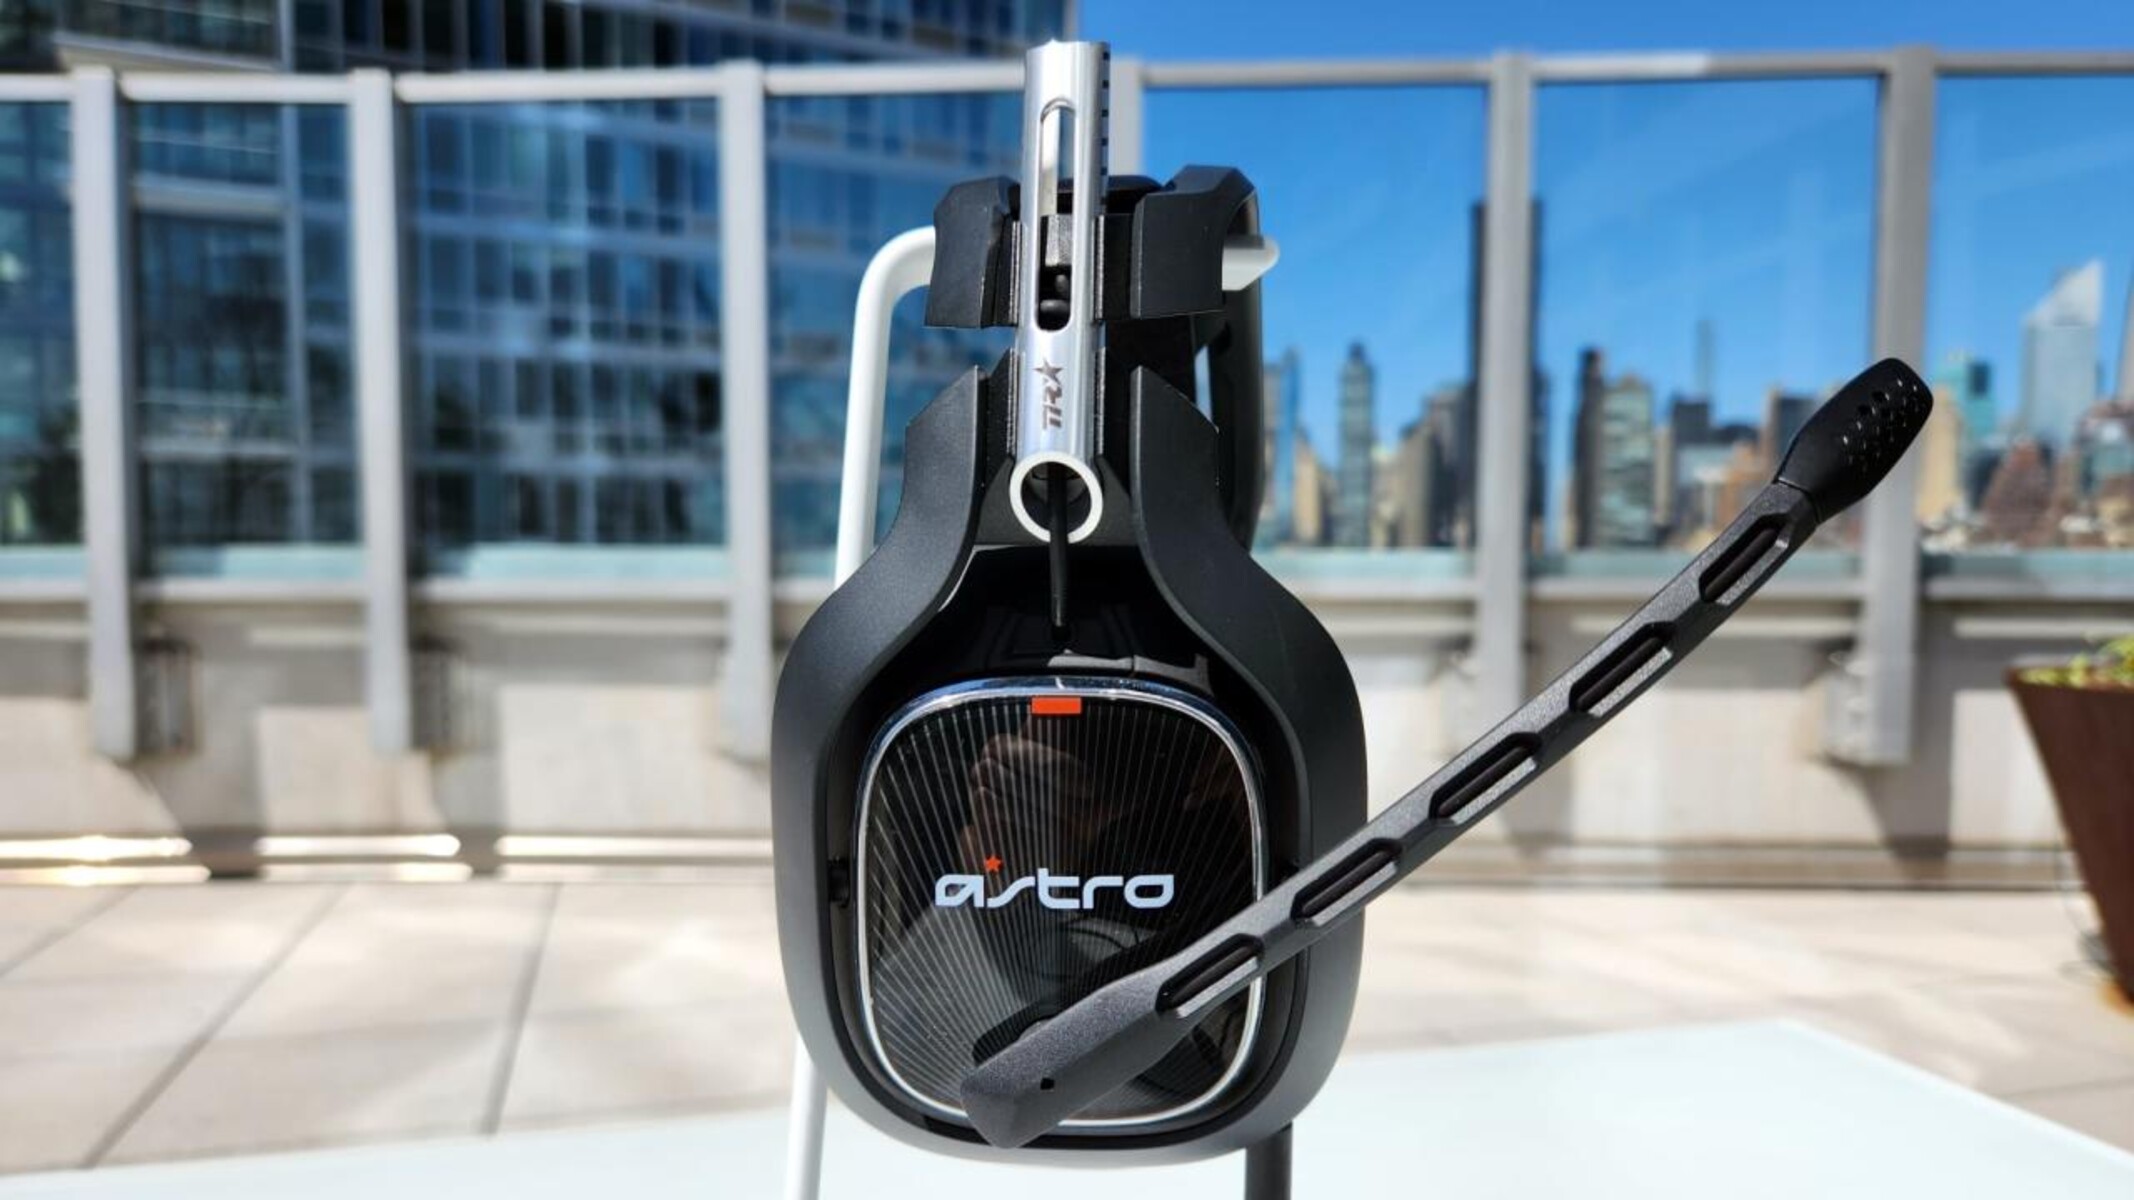 What Is The Best 7.1 Gaming Headset?